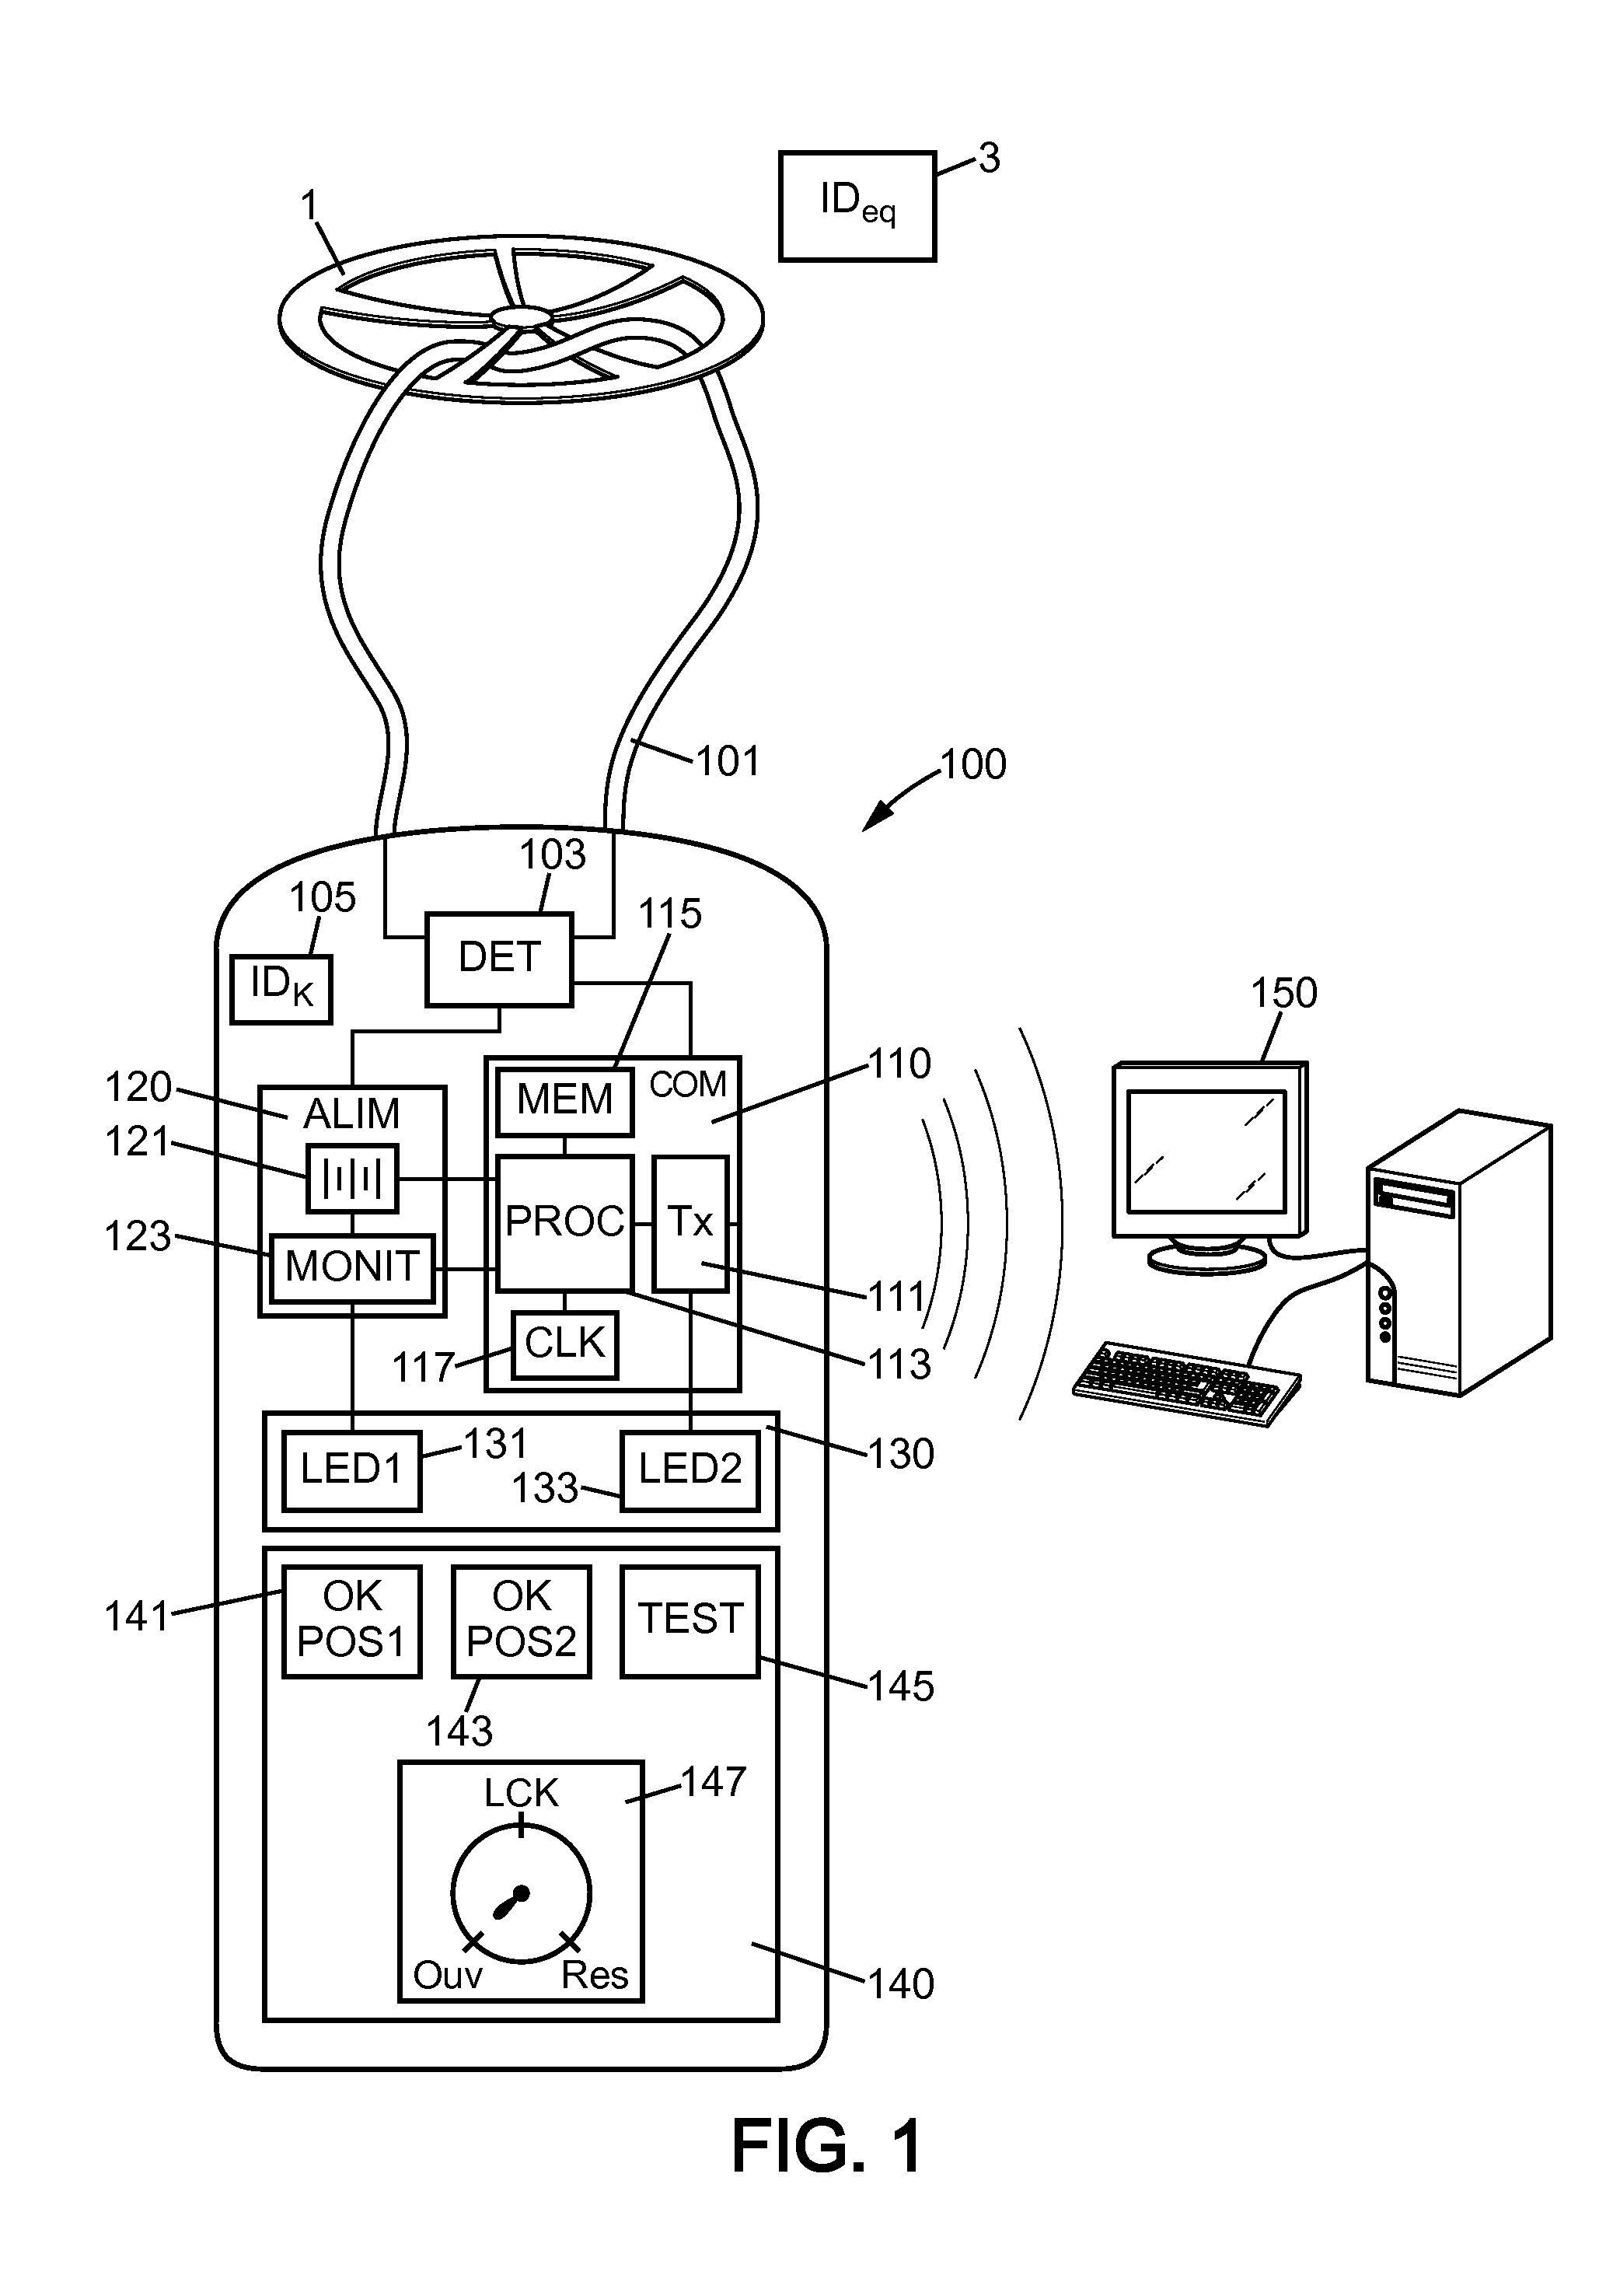 Communicating device and method of locking out an item of equipment